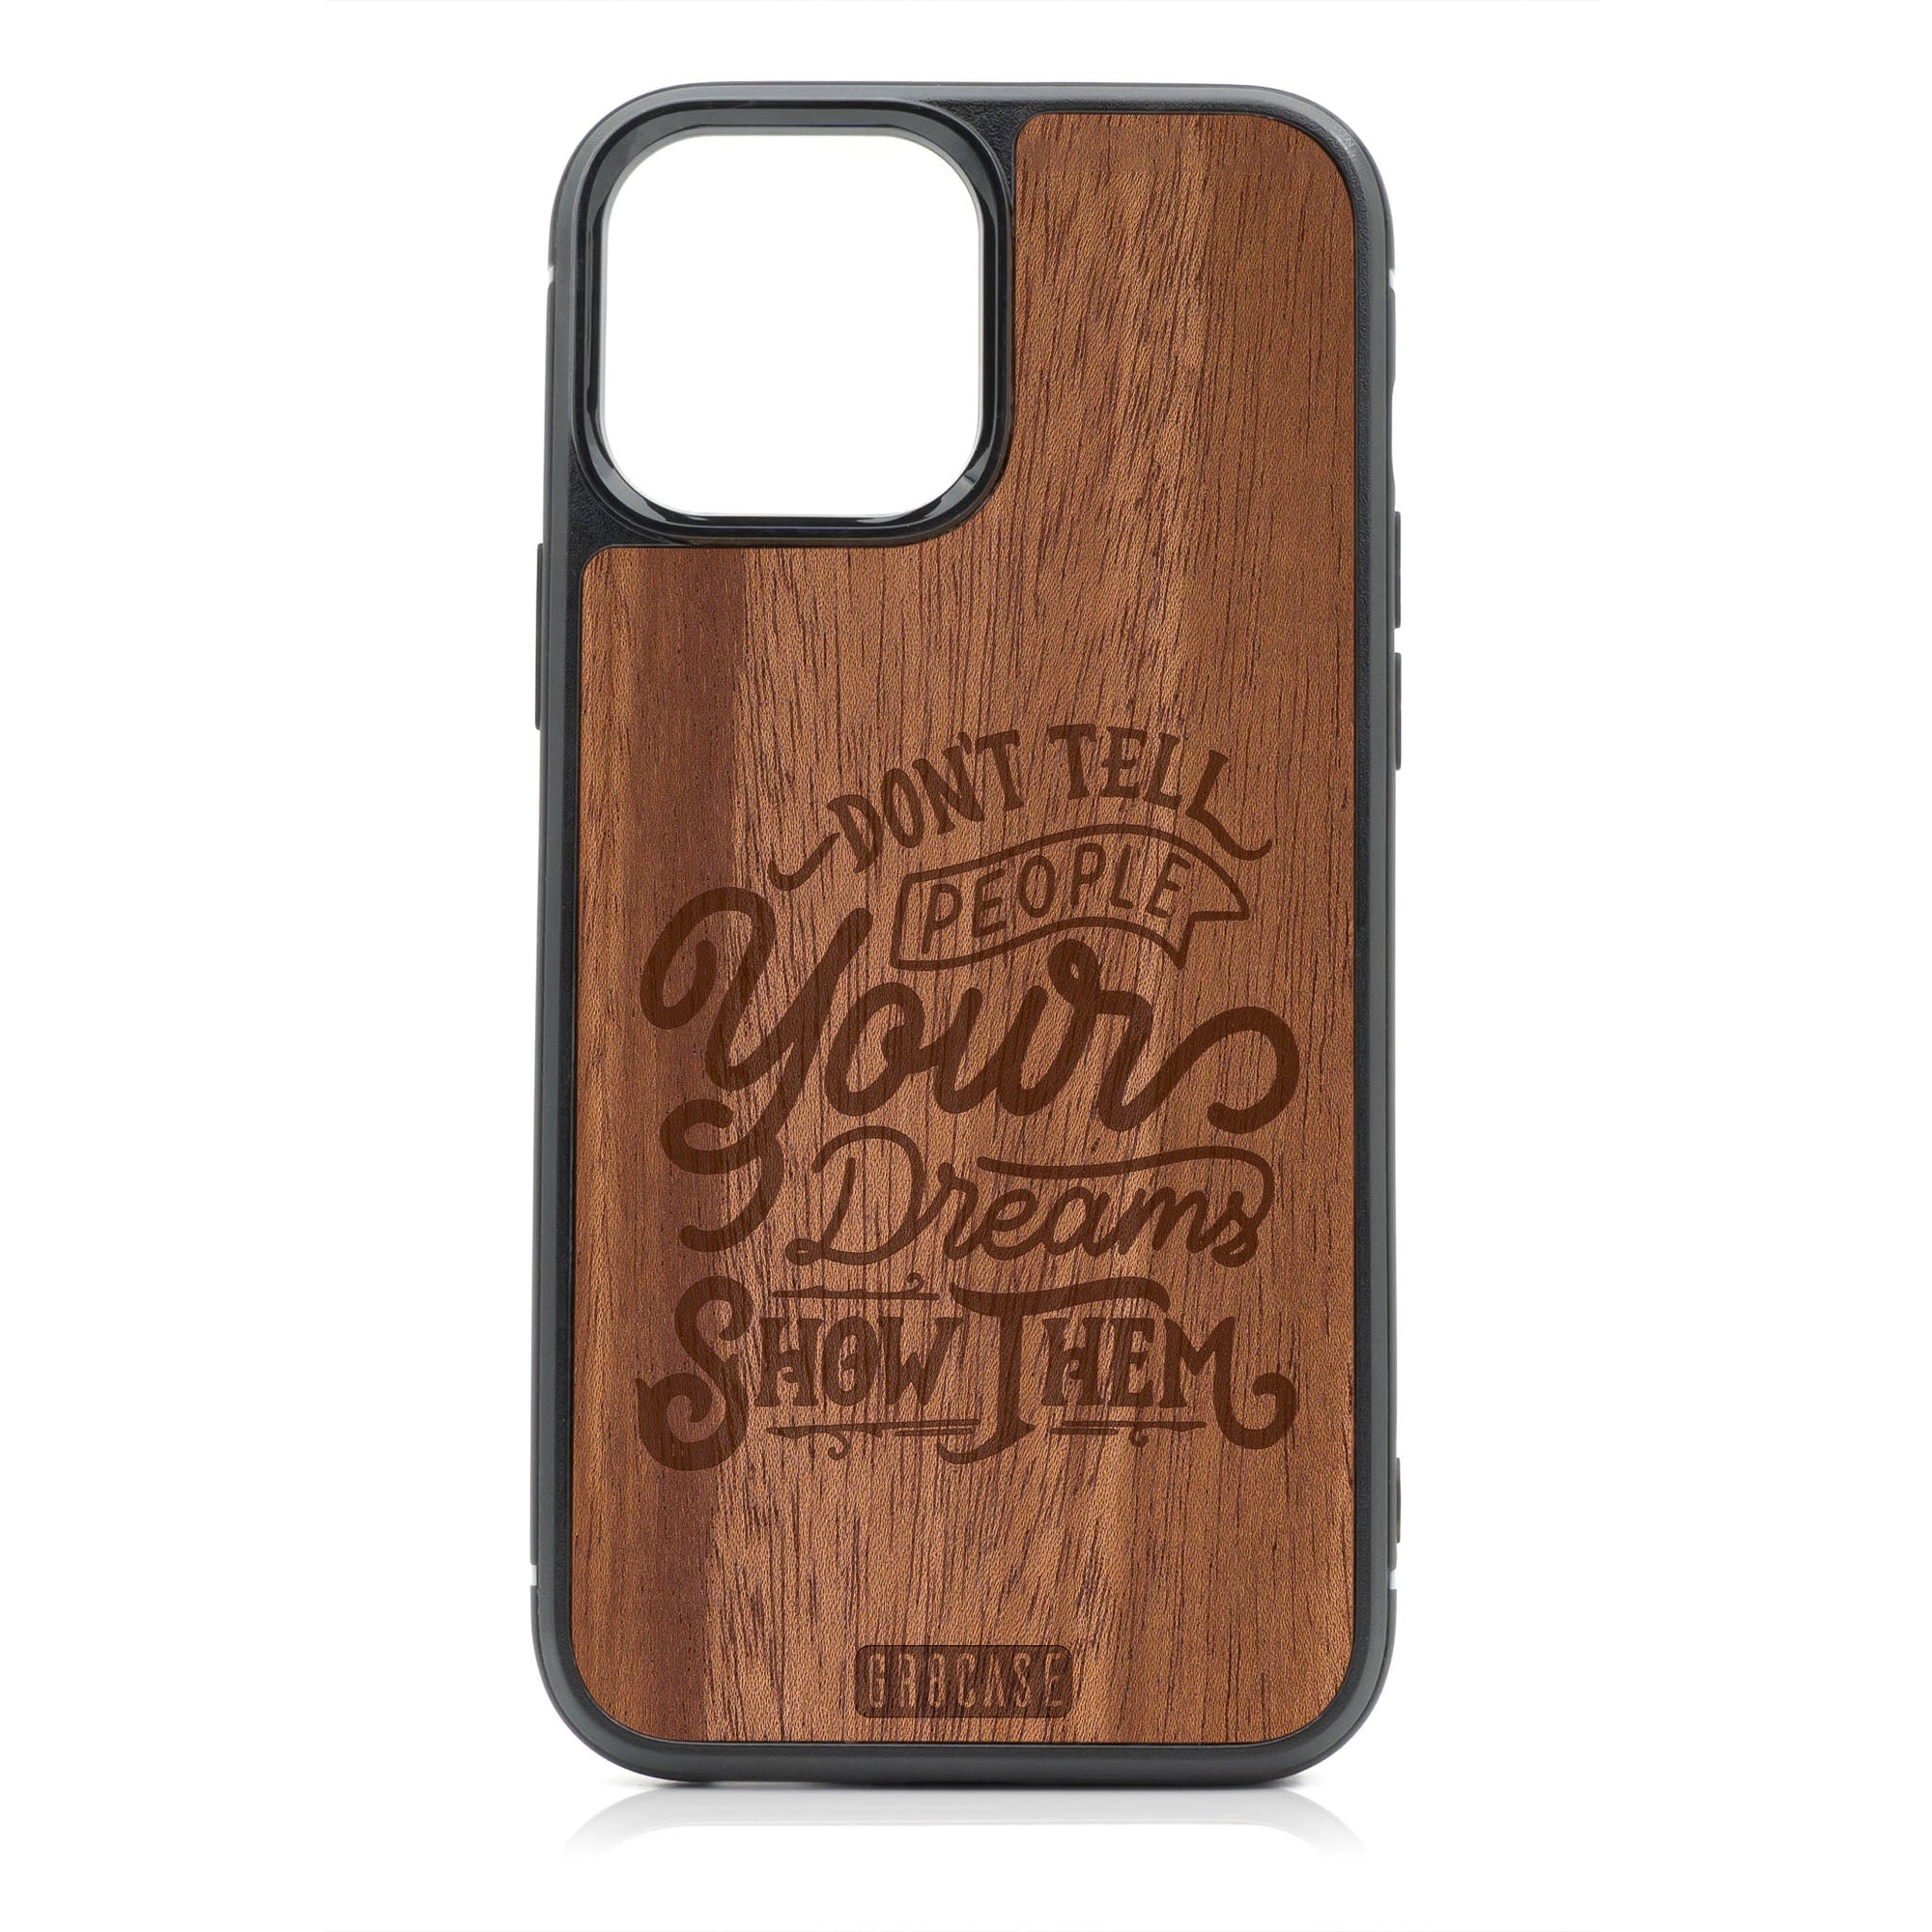 Don't Tell People Your Dreams Show Them Design Wood Case For iPhone 14 Pro Max